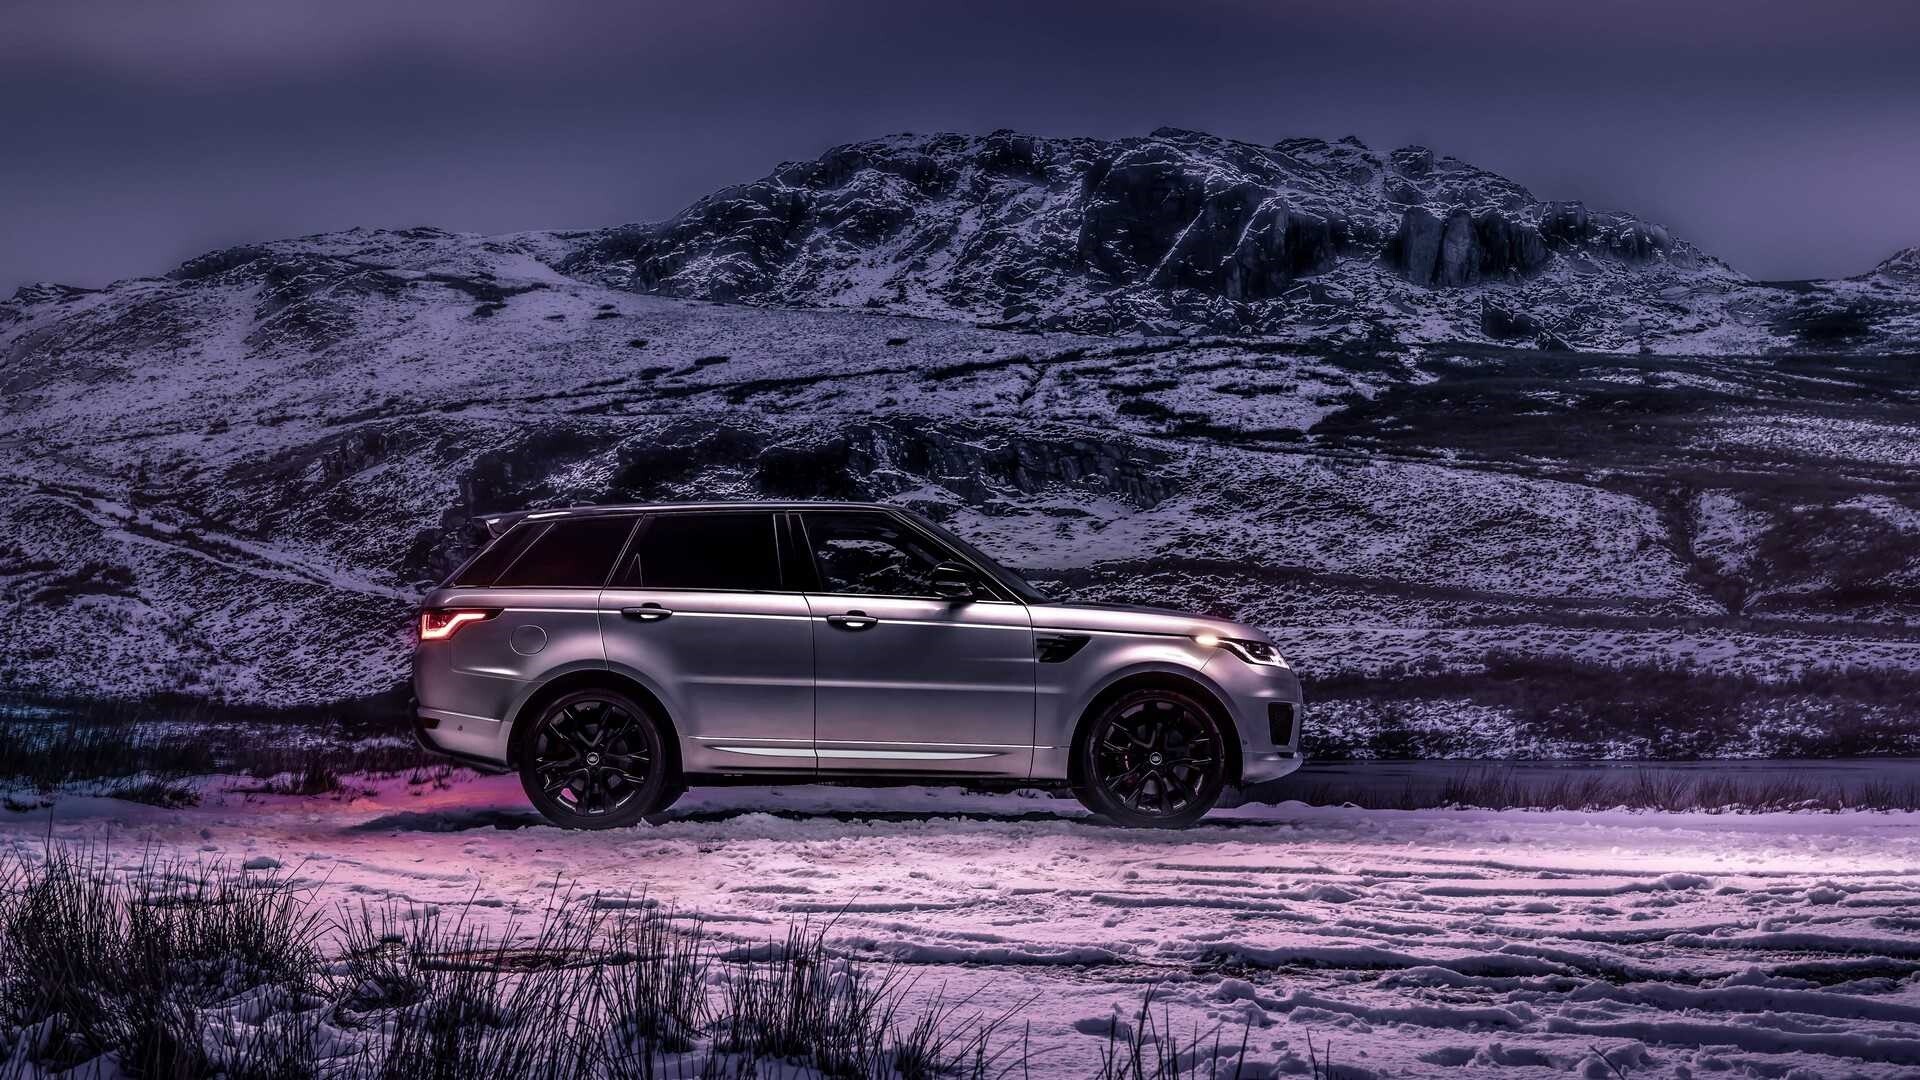 Range Rover: 2020 model Sport HST Special Edition, The British marque. 1920x1080 Full HD Wallpaper.